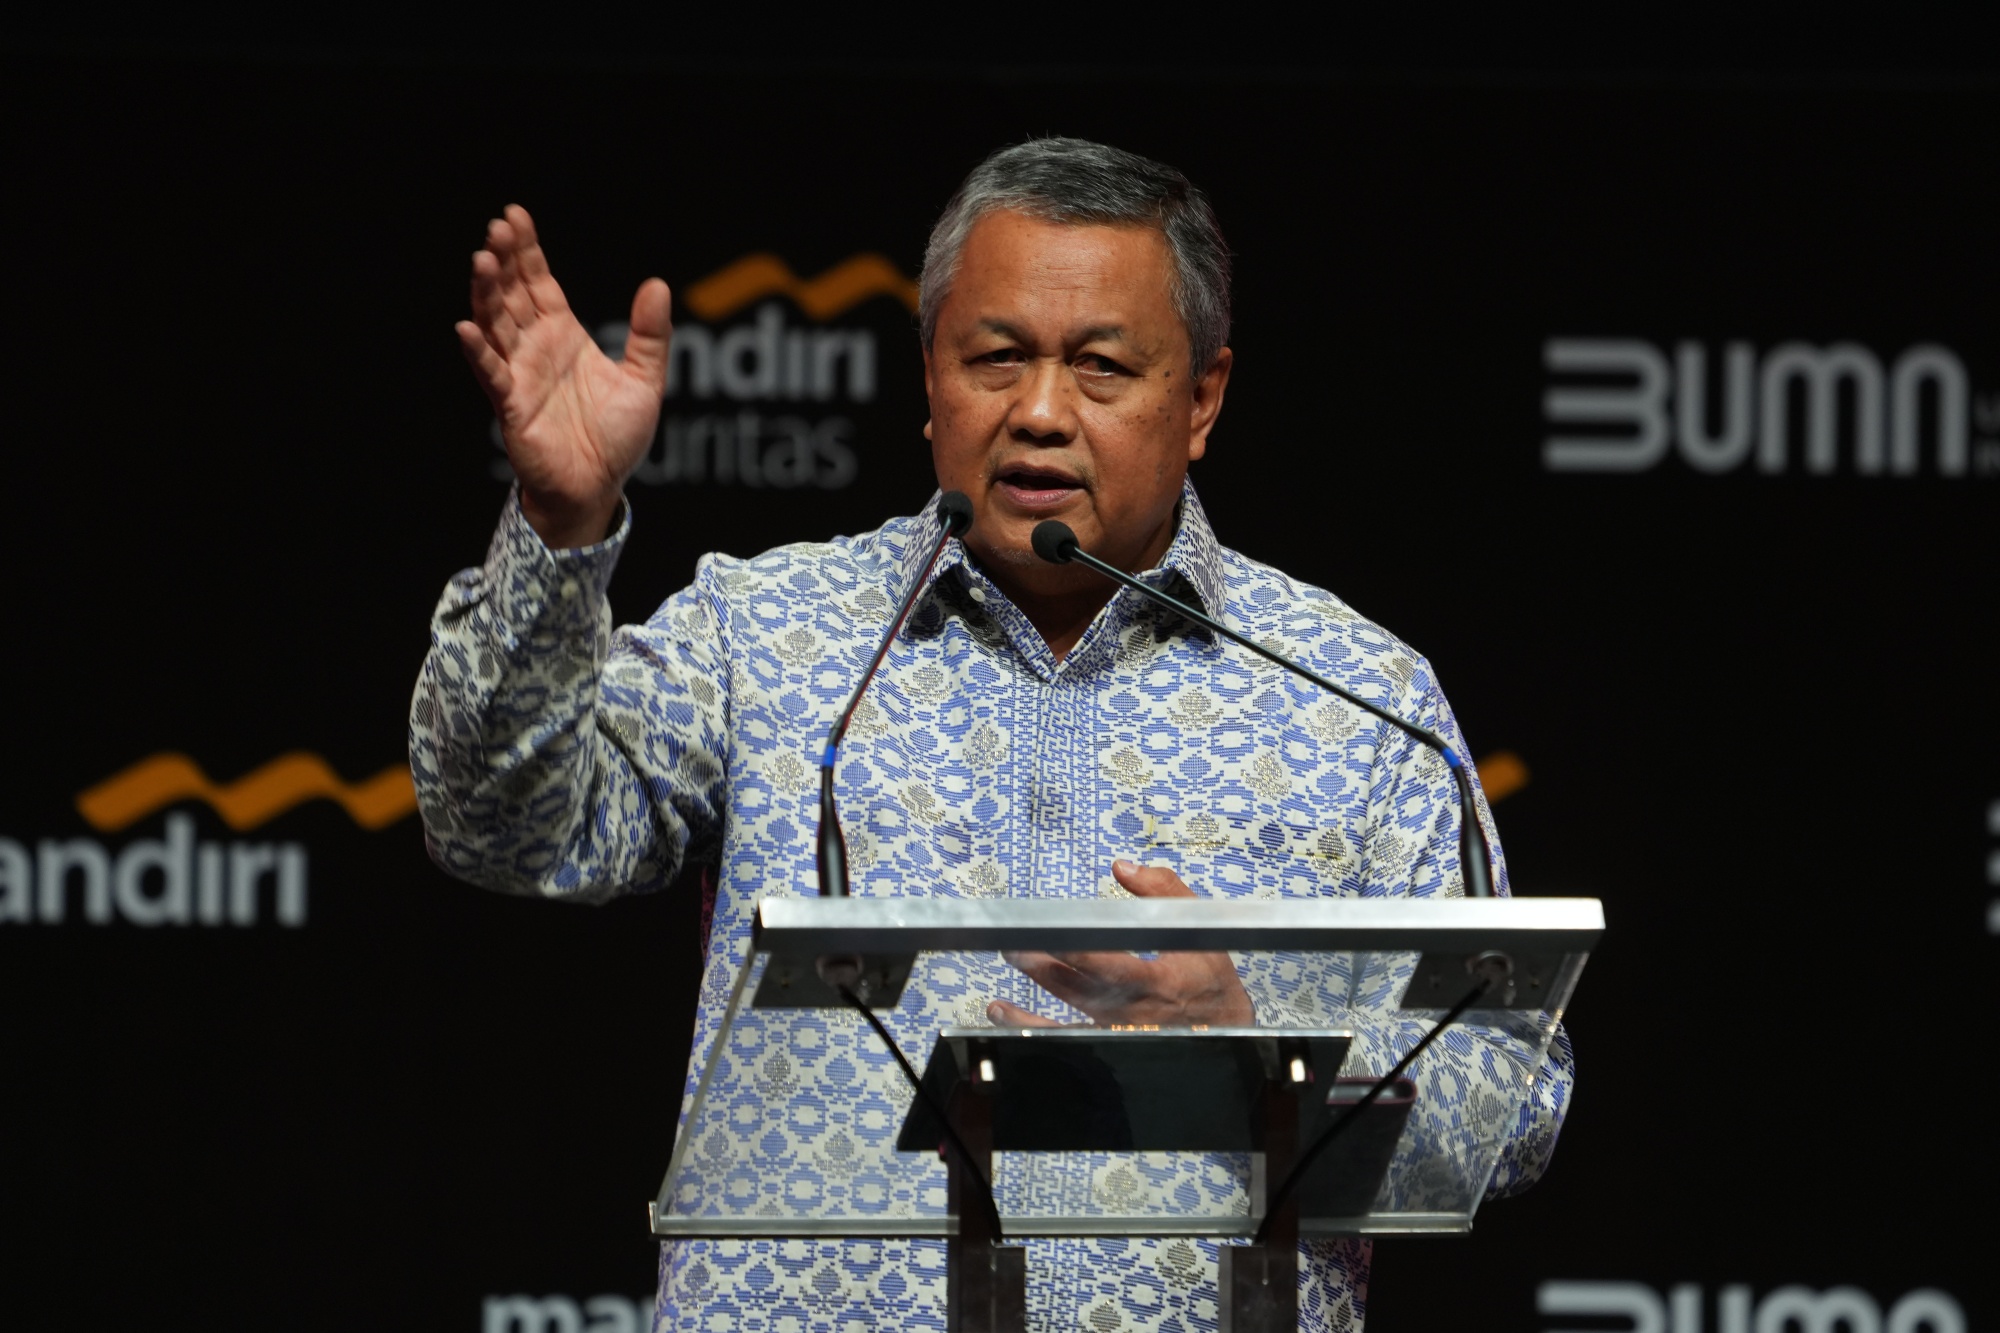 Bank Indonesias Perry Warjiyo Nominated for Second Term as Governor